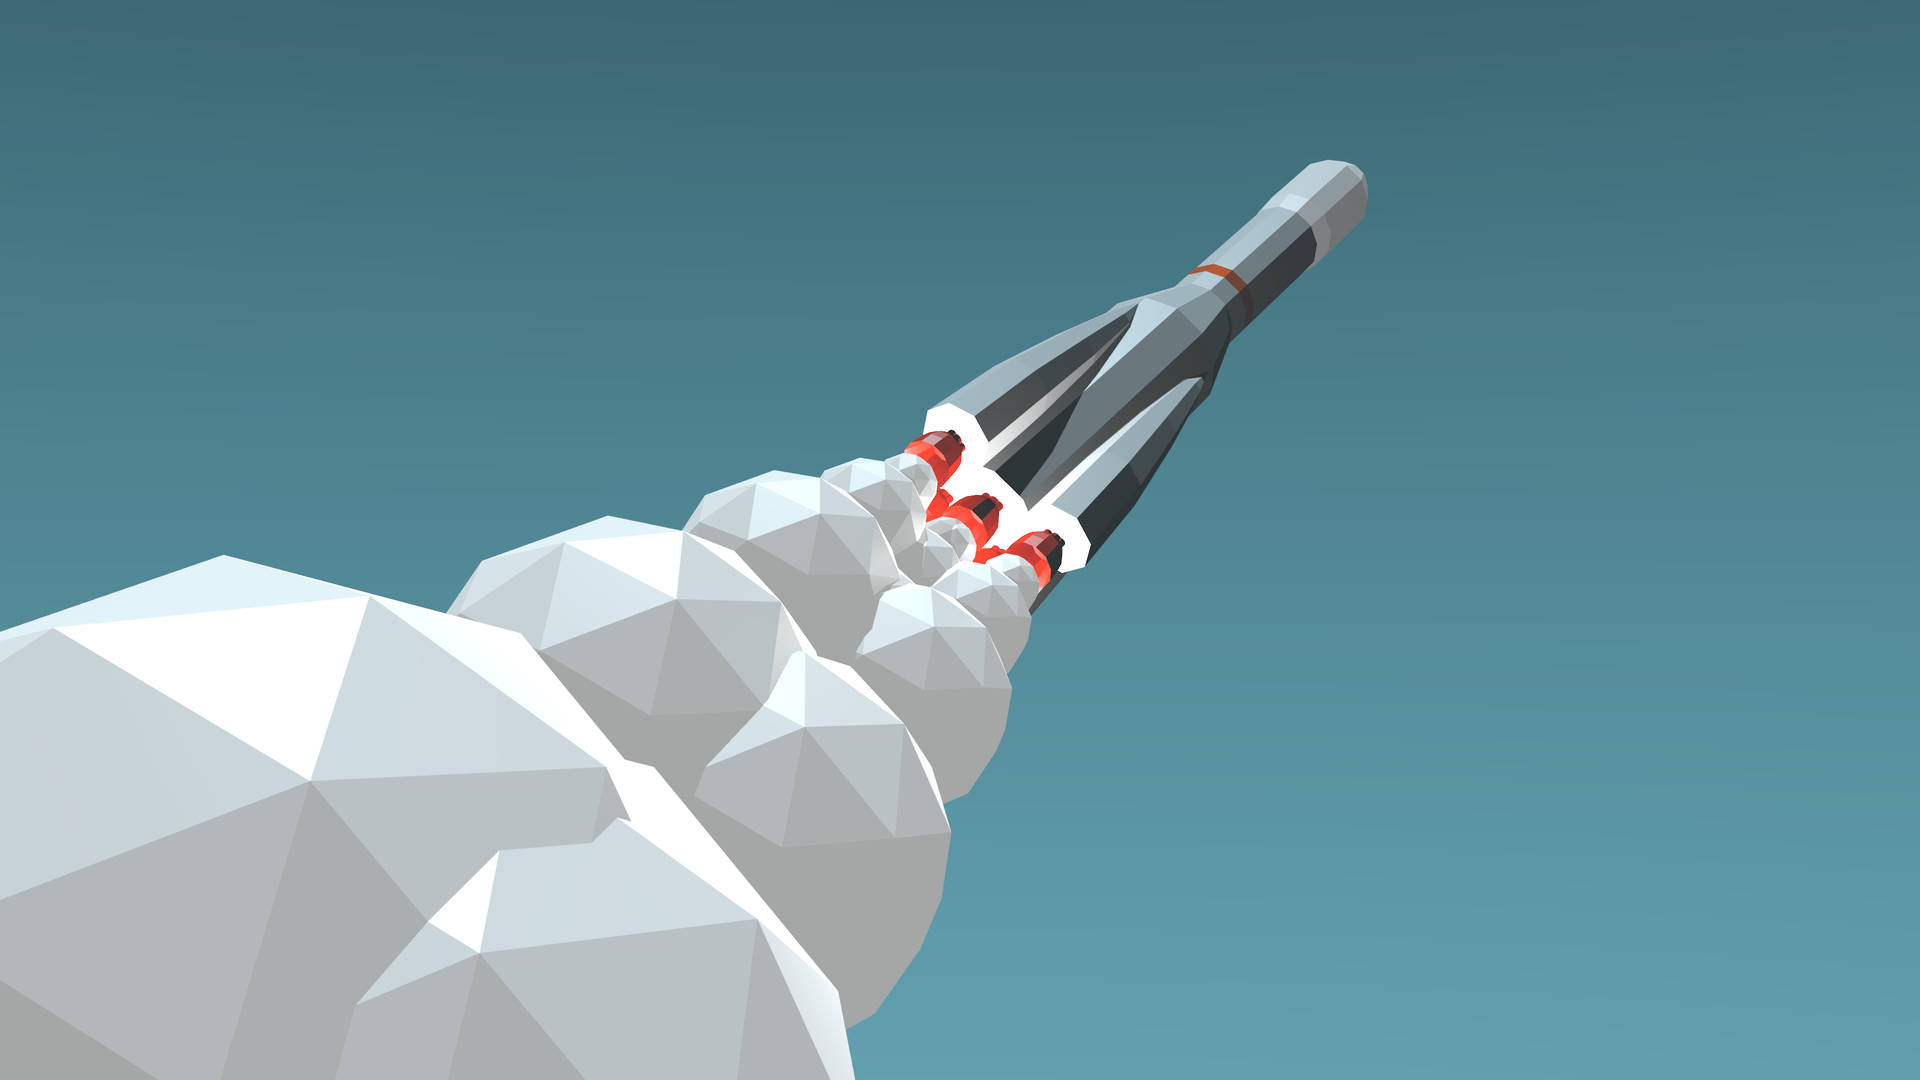 Low Poly Rocket Background